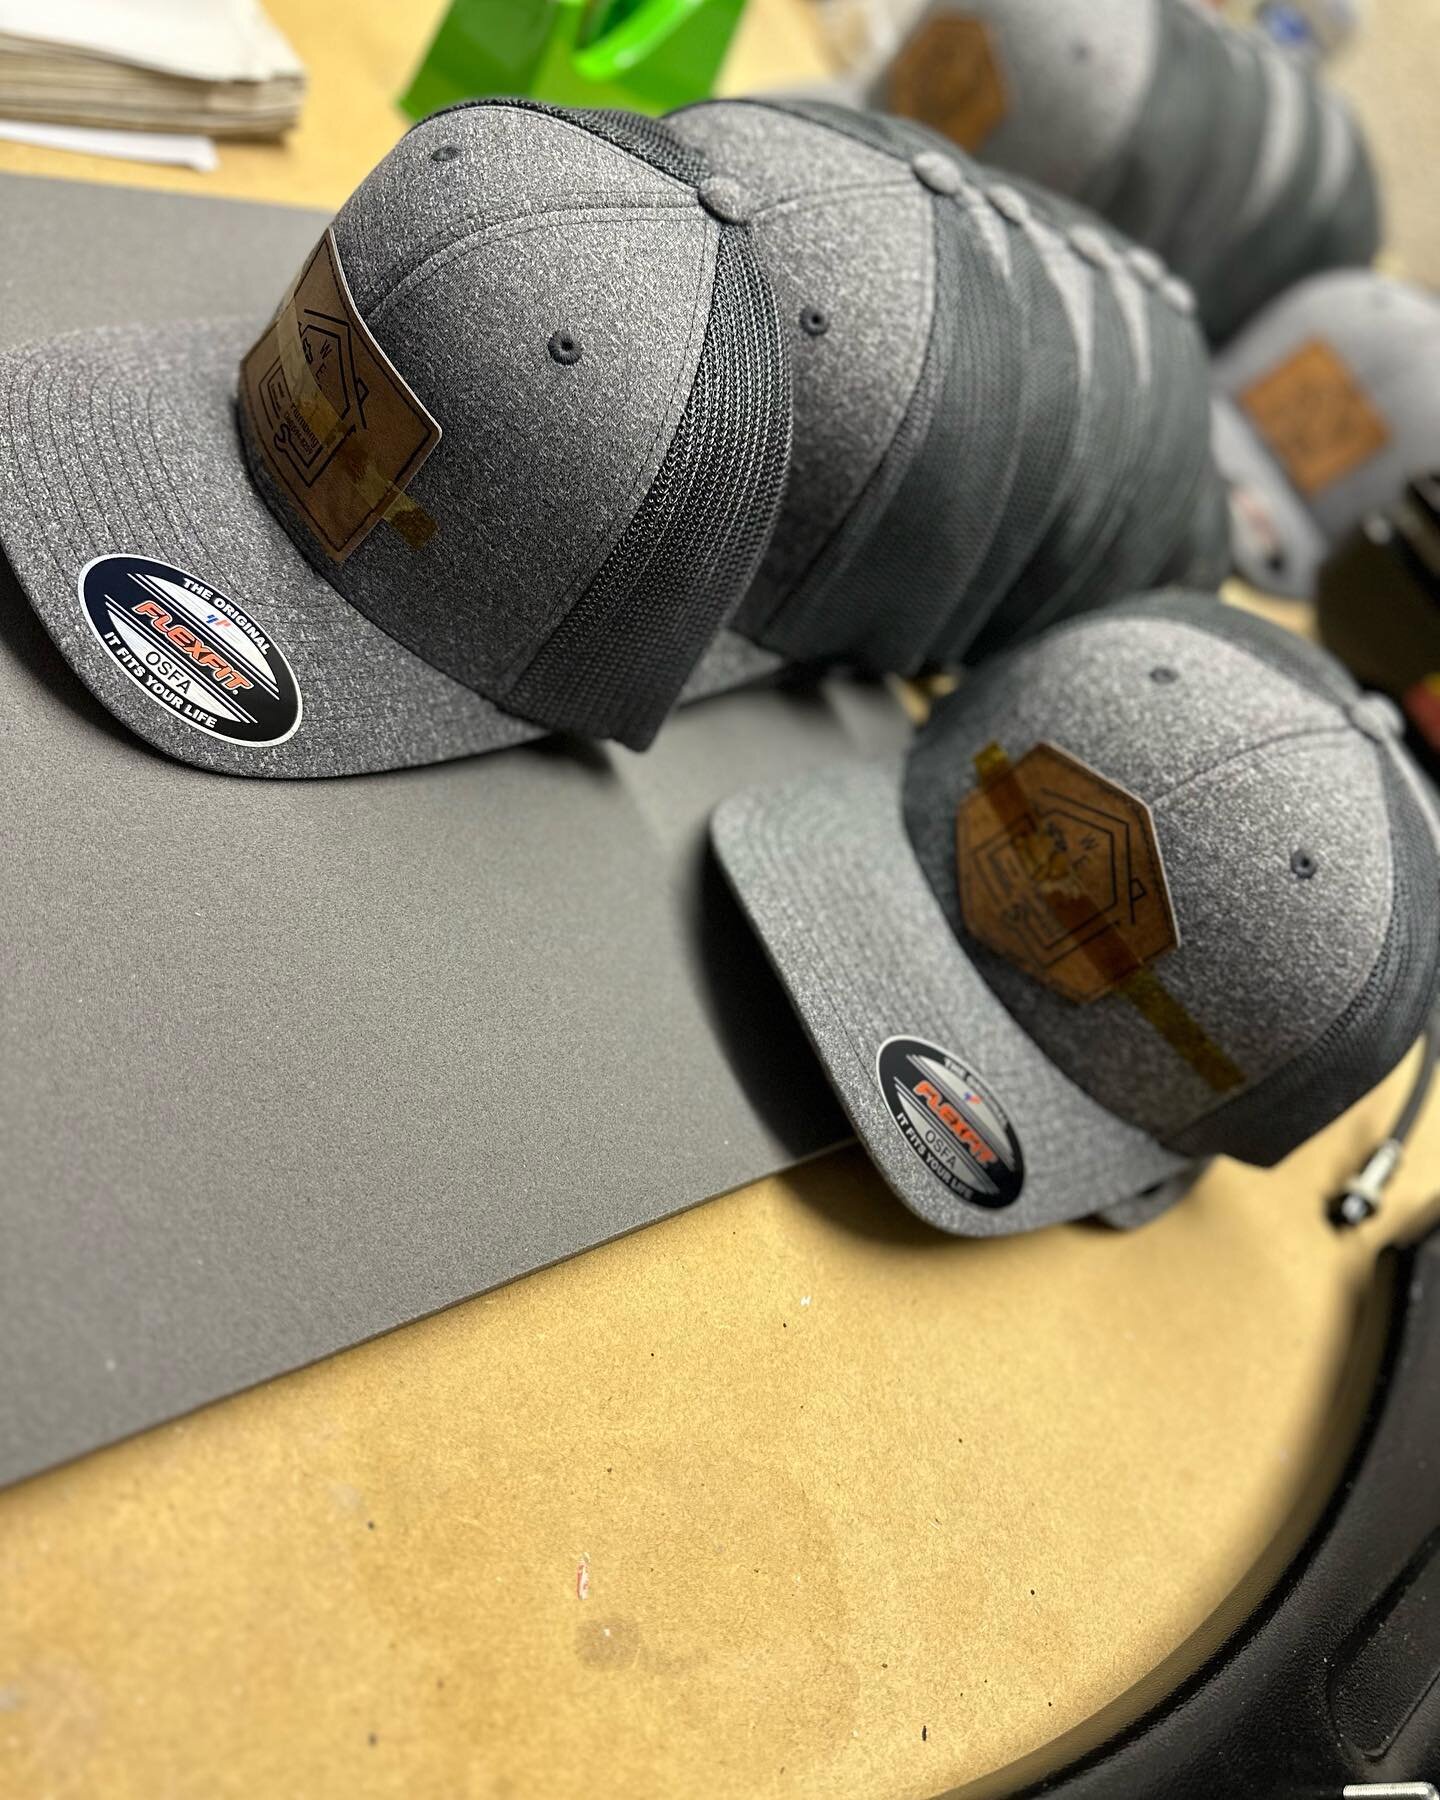 The end result of those patches! Contact us for your next custom order! #blockhousemarket #smallbusiness #hats #leatherpatchhats #customorder